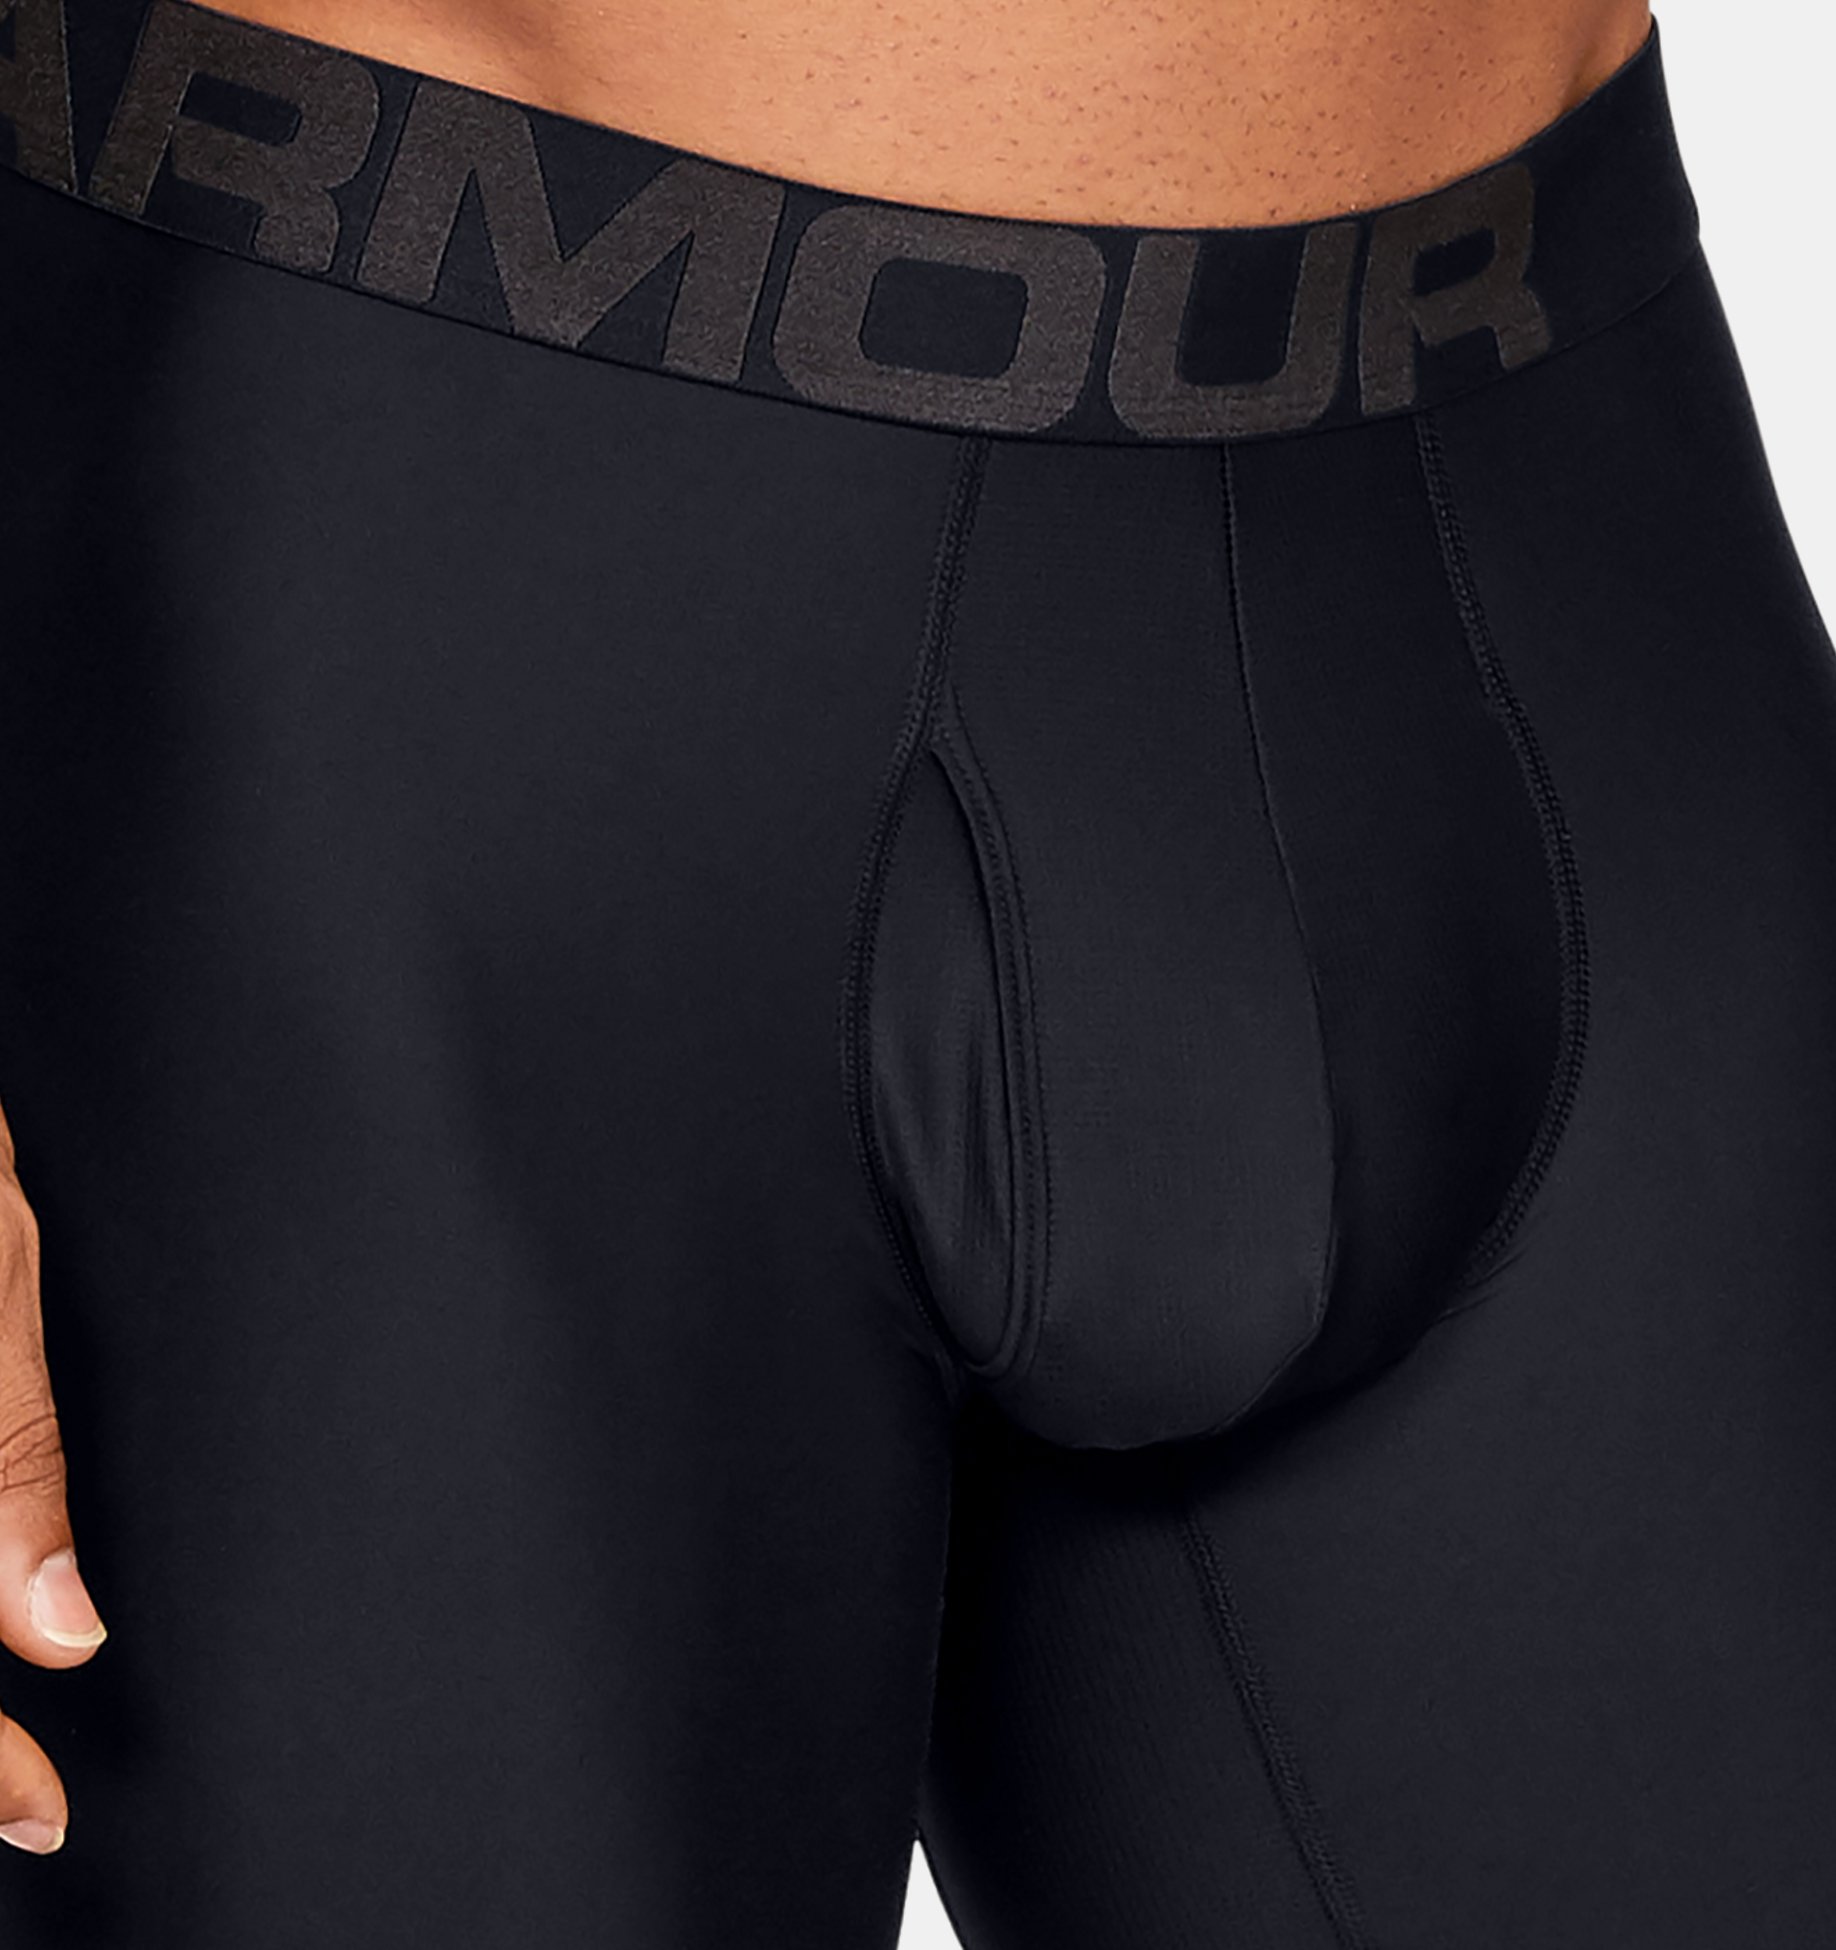 Under Armour Charged Cotton 6 Boxerjock 3-Pack Barley/Black Cam  1327427-233 - Free Shipping at LASC